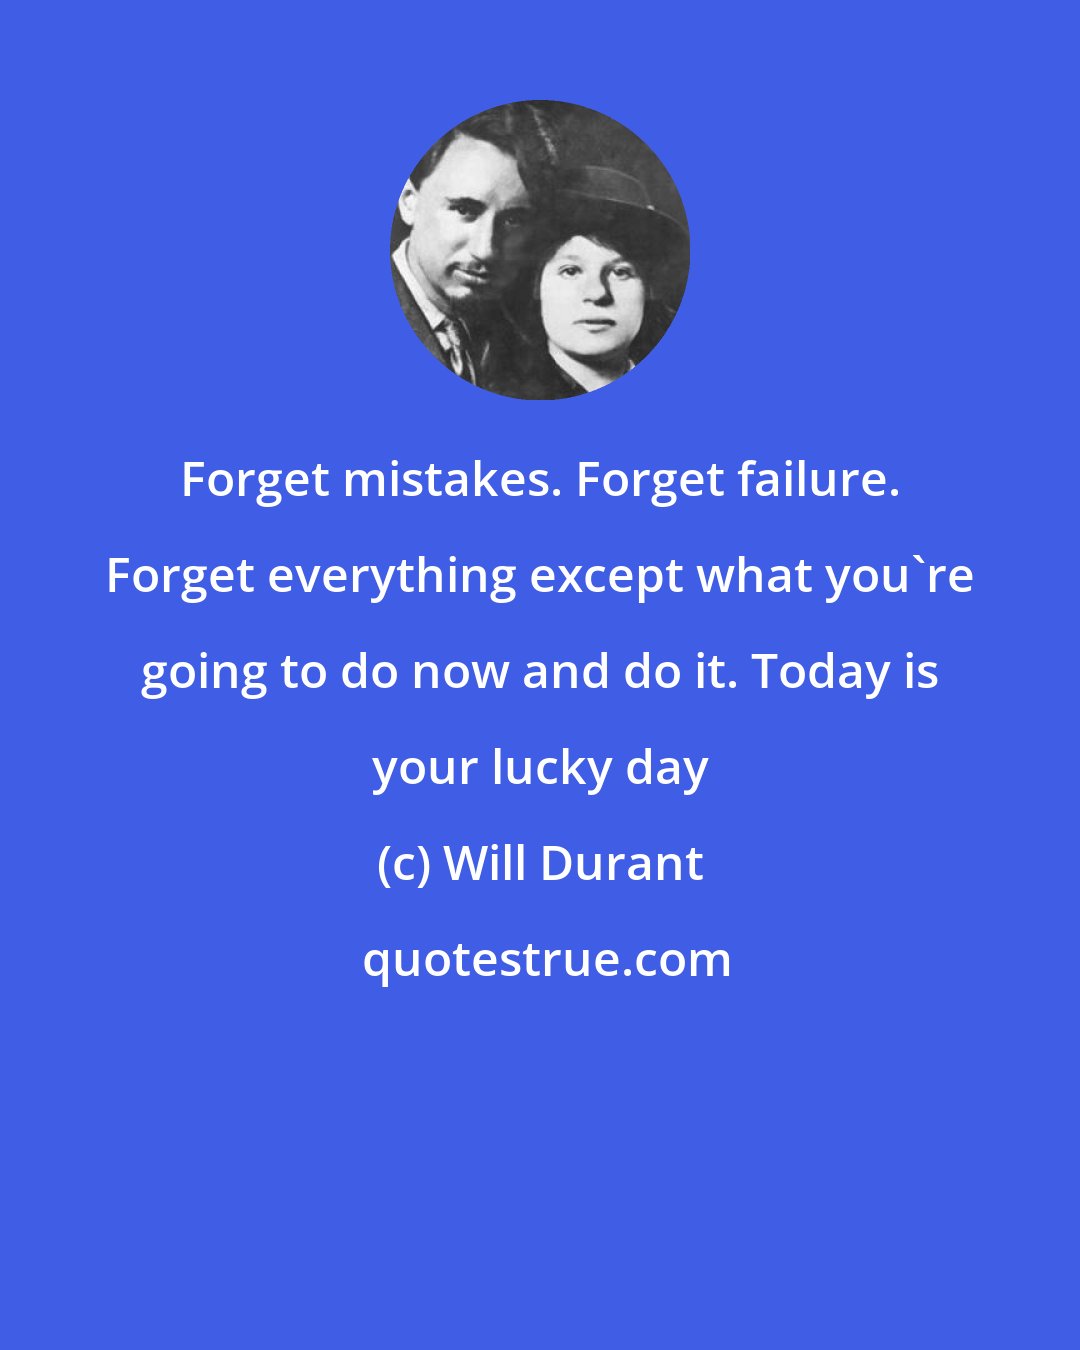 Will Durant: Forget mistakes. Forget failure. Forget everything except what you're going to do now and do it. Today is your lucky day